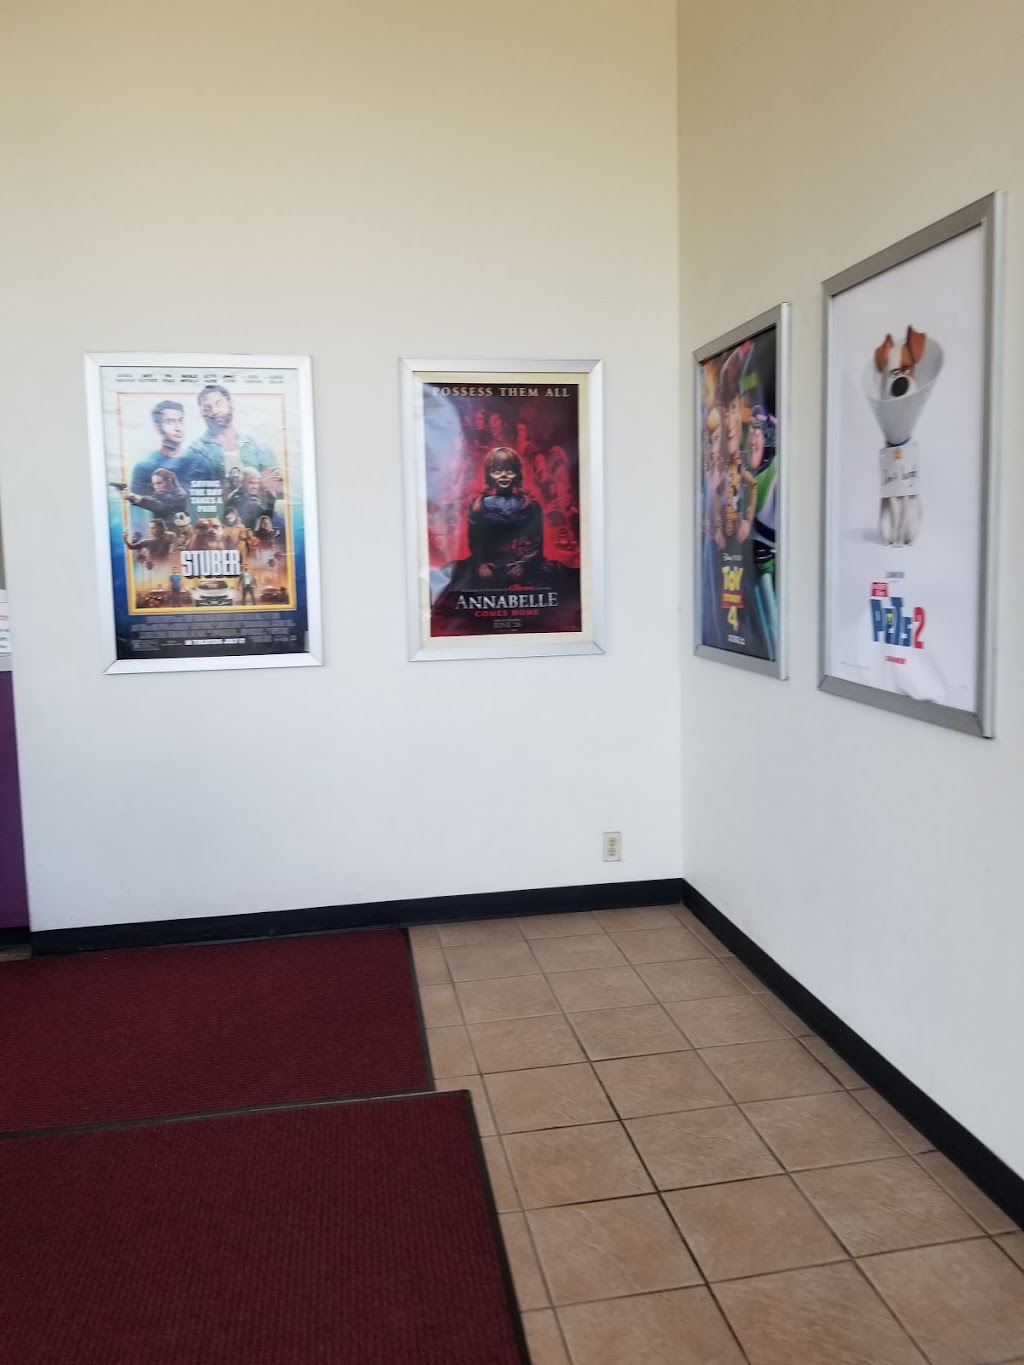 Lyceum Cinemas | 15 Old Farm Rd, Red Hook, NY 12571 | Phone: (845) 758-3311